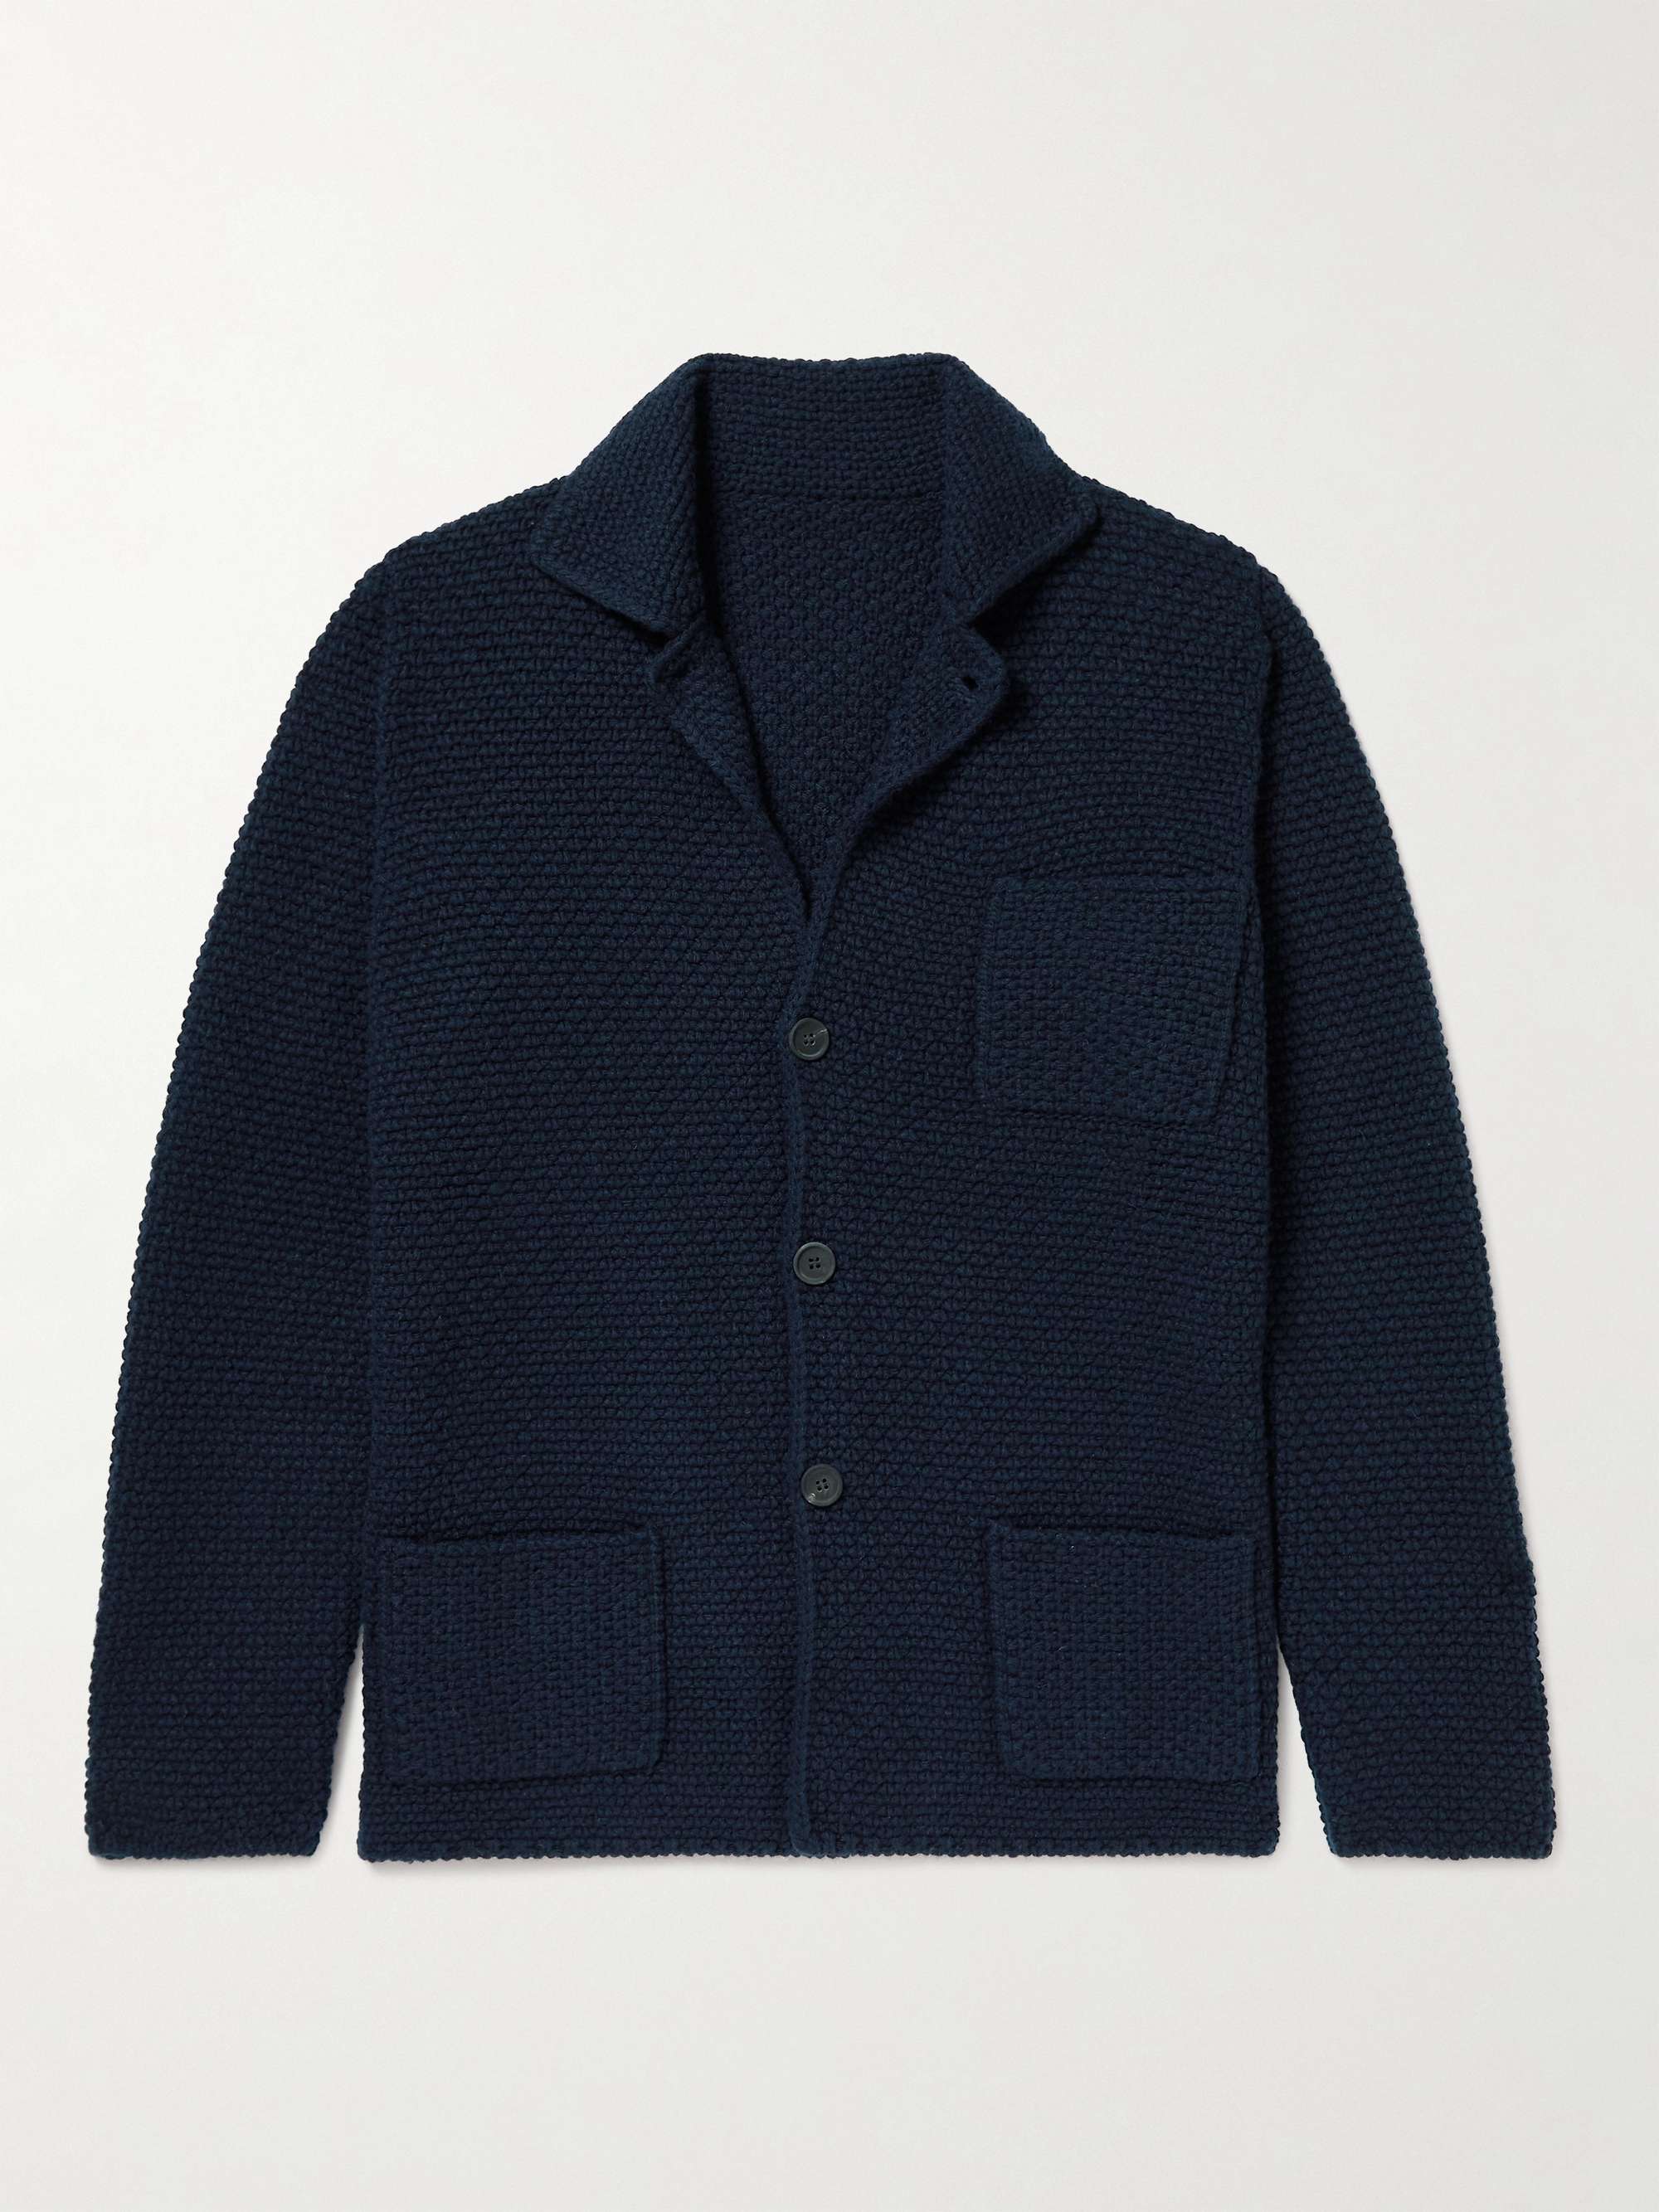 ANDERSON & SHEPPARD Slim-Fit Textured Wool and Cashmere-Blend Cardigan